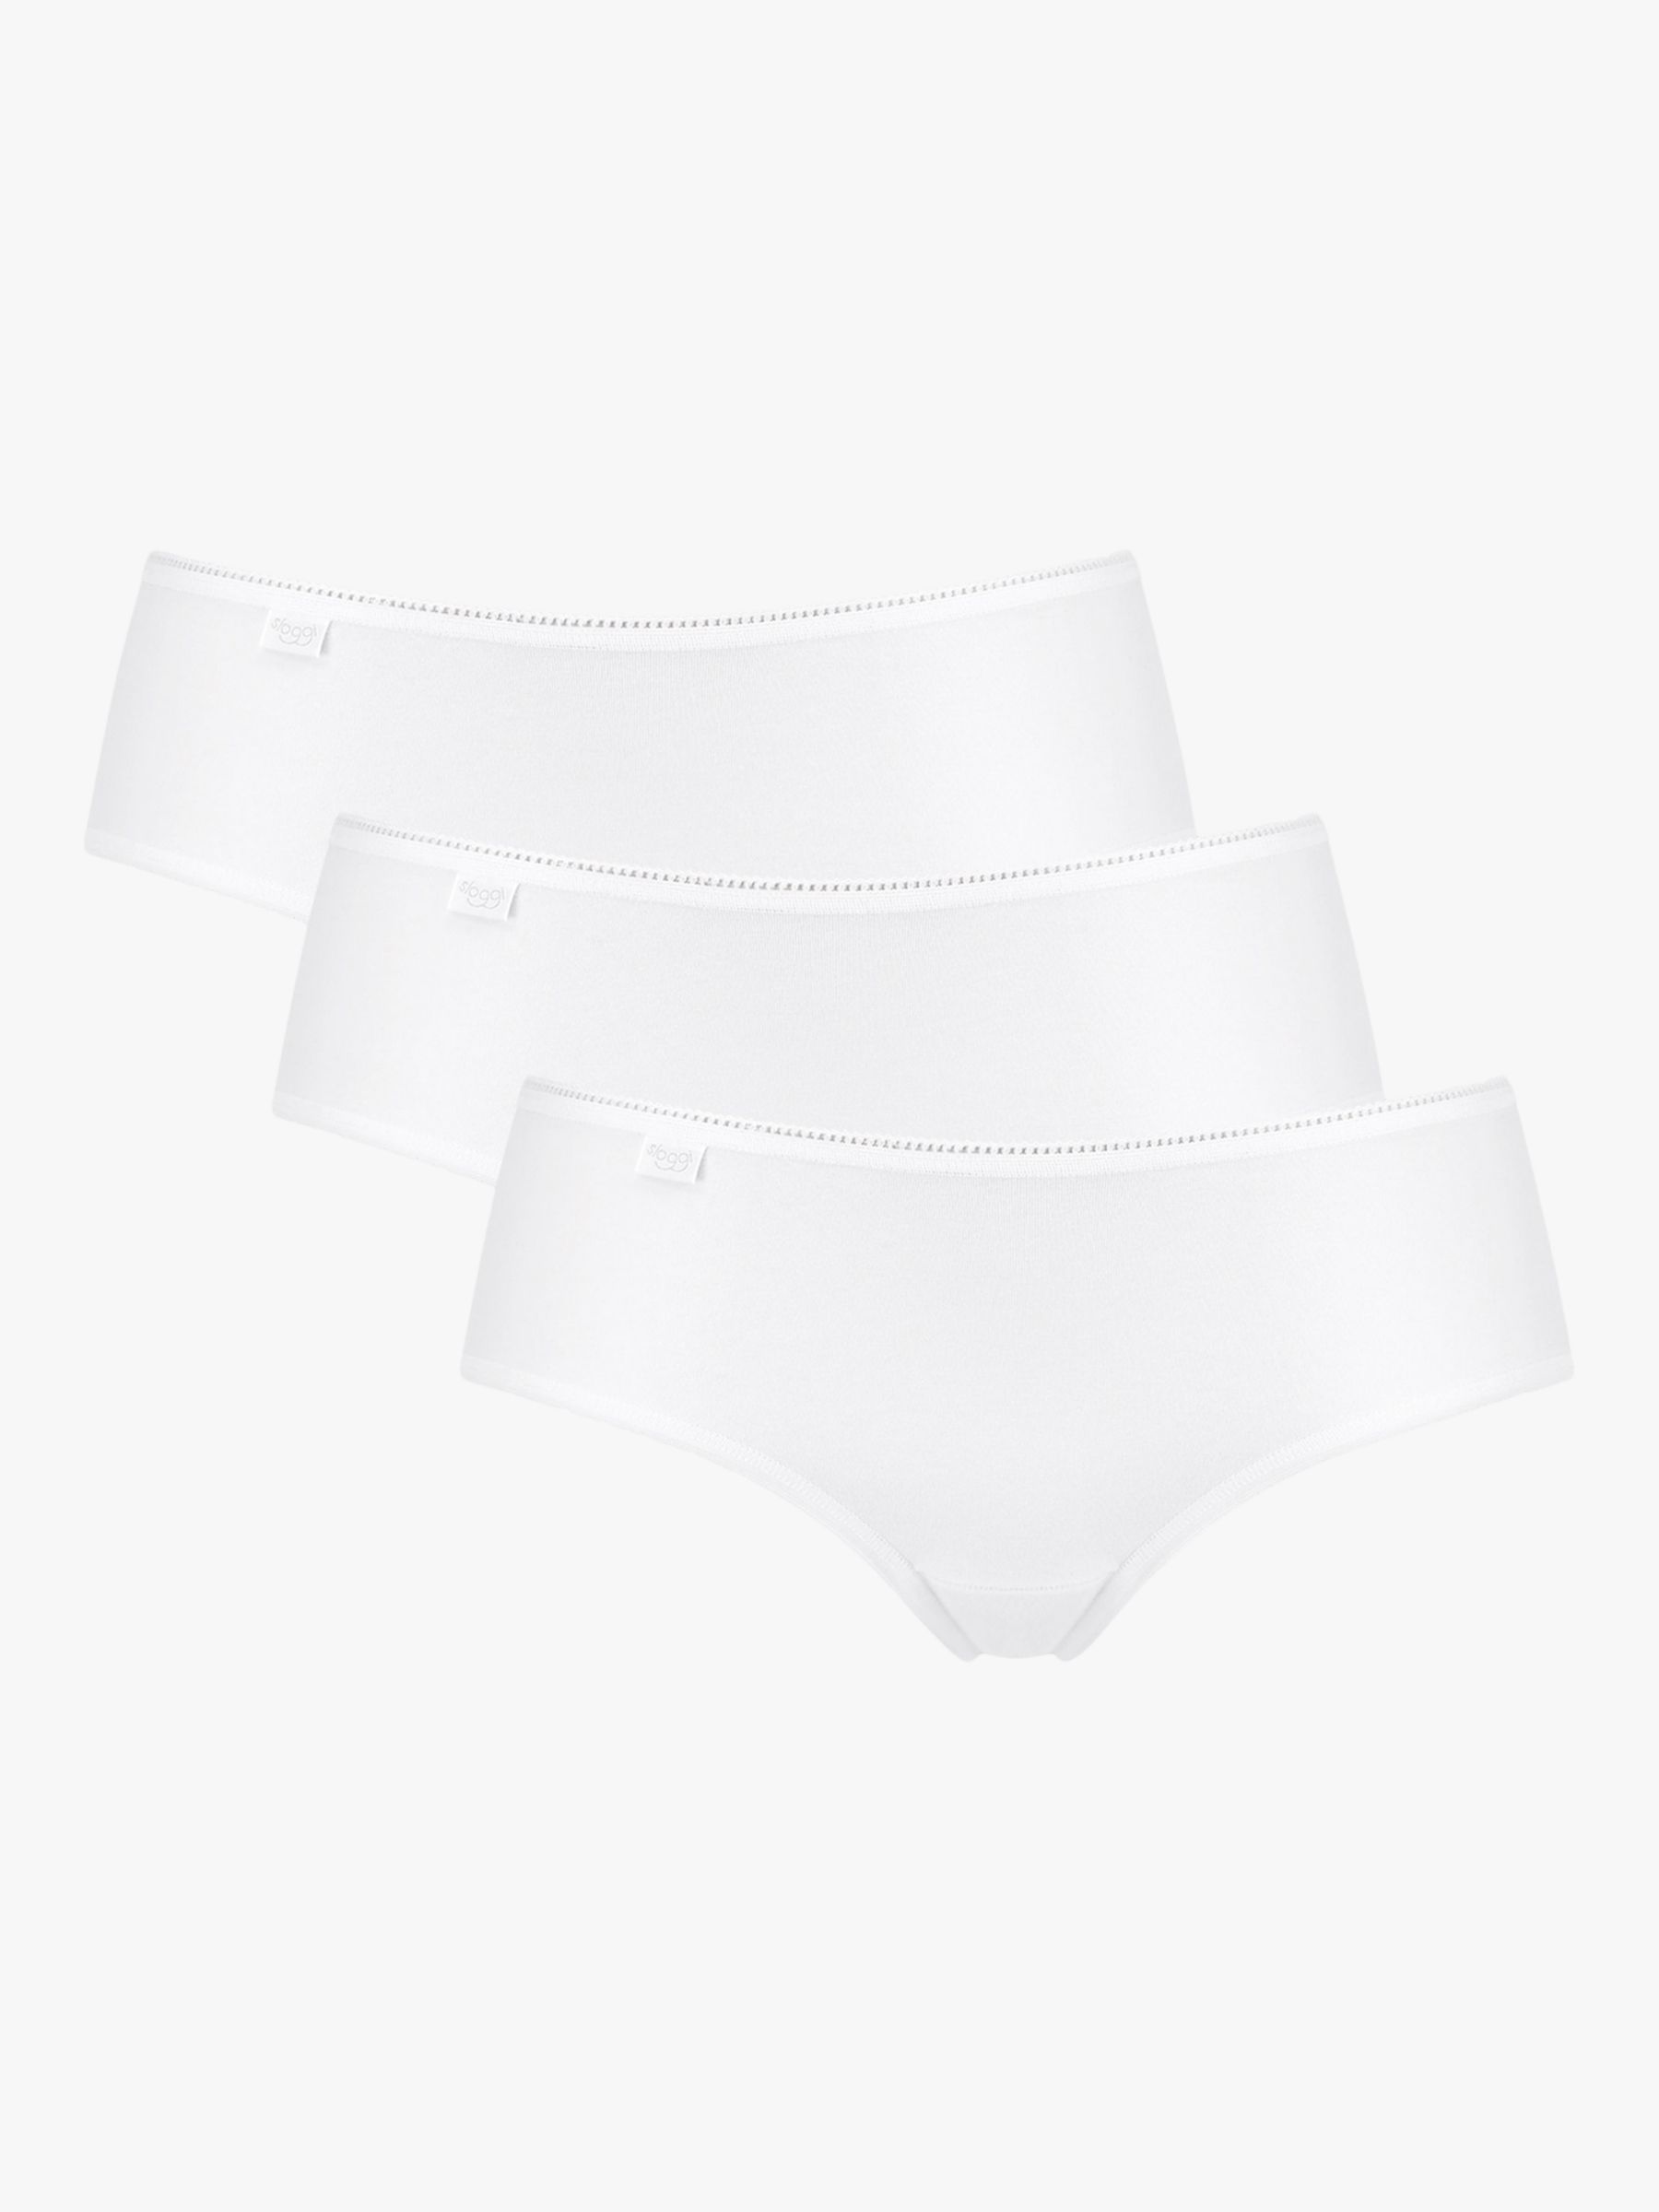 sloggi 24/7 Microfibre Hipster Knickers, Pack of 3, White, 10